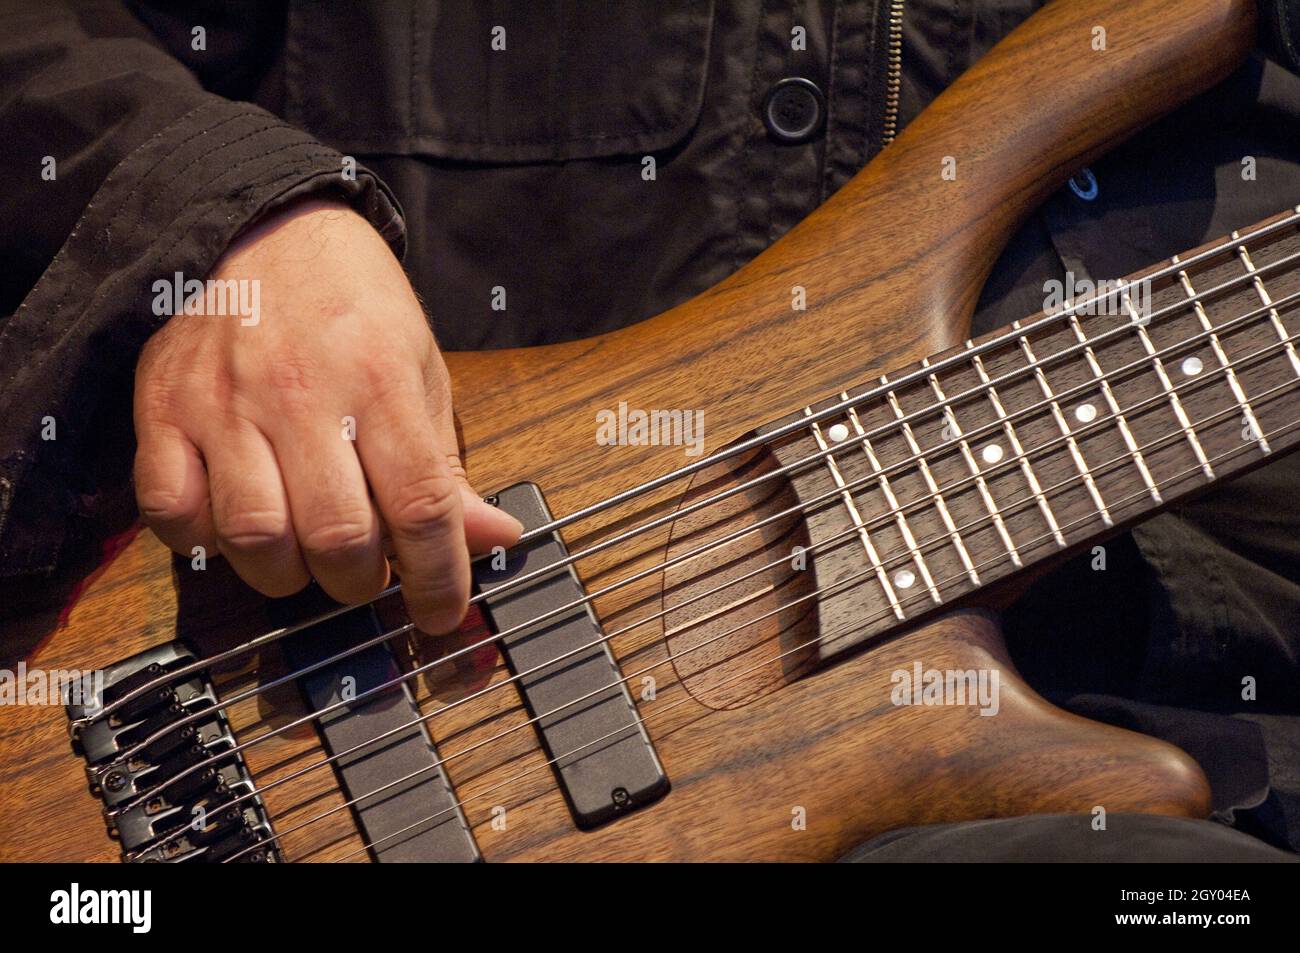 bassist with guitar Stock Photo